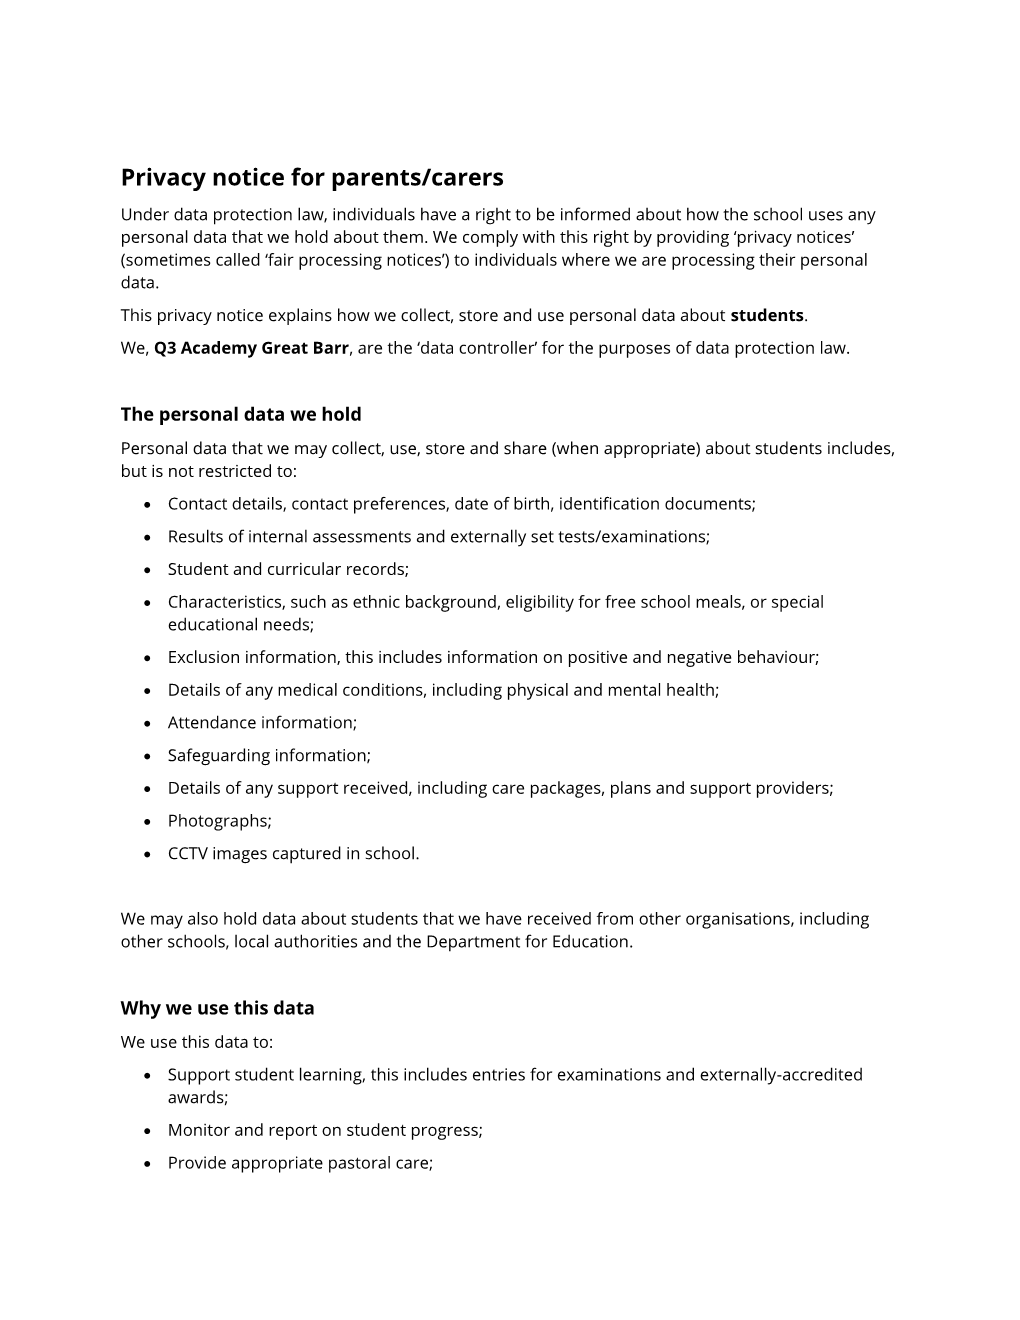 Privacy Notice for Parents/Carers